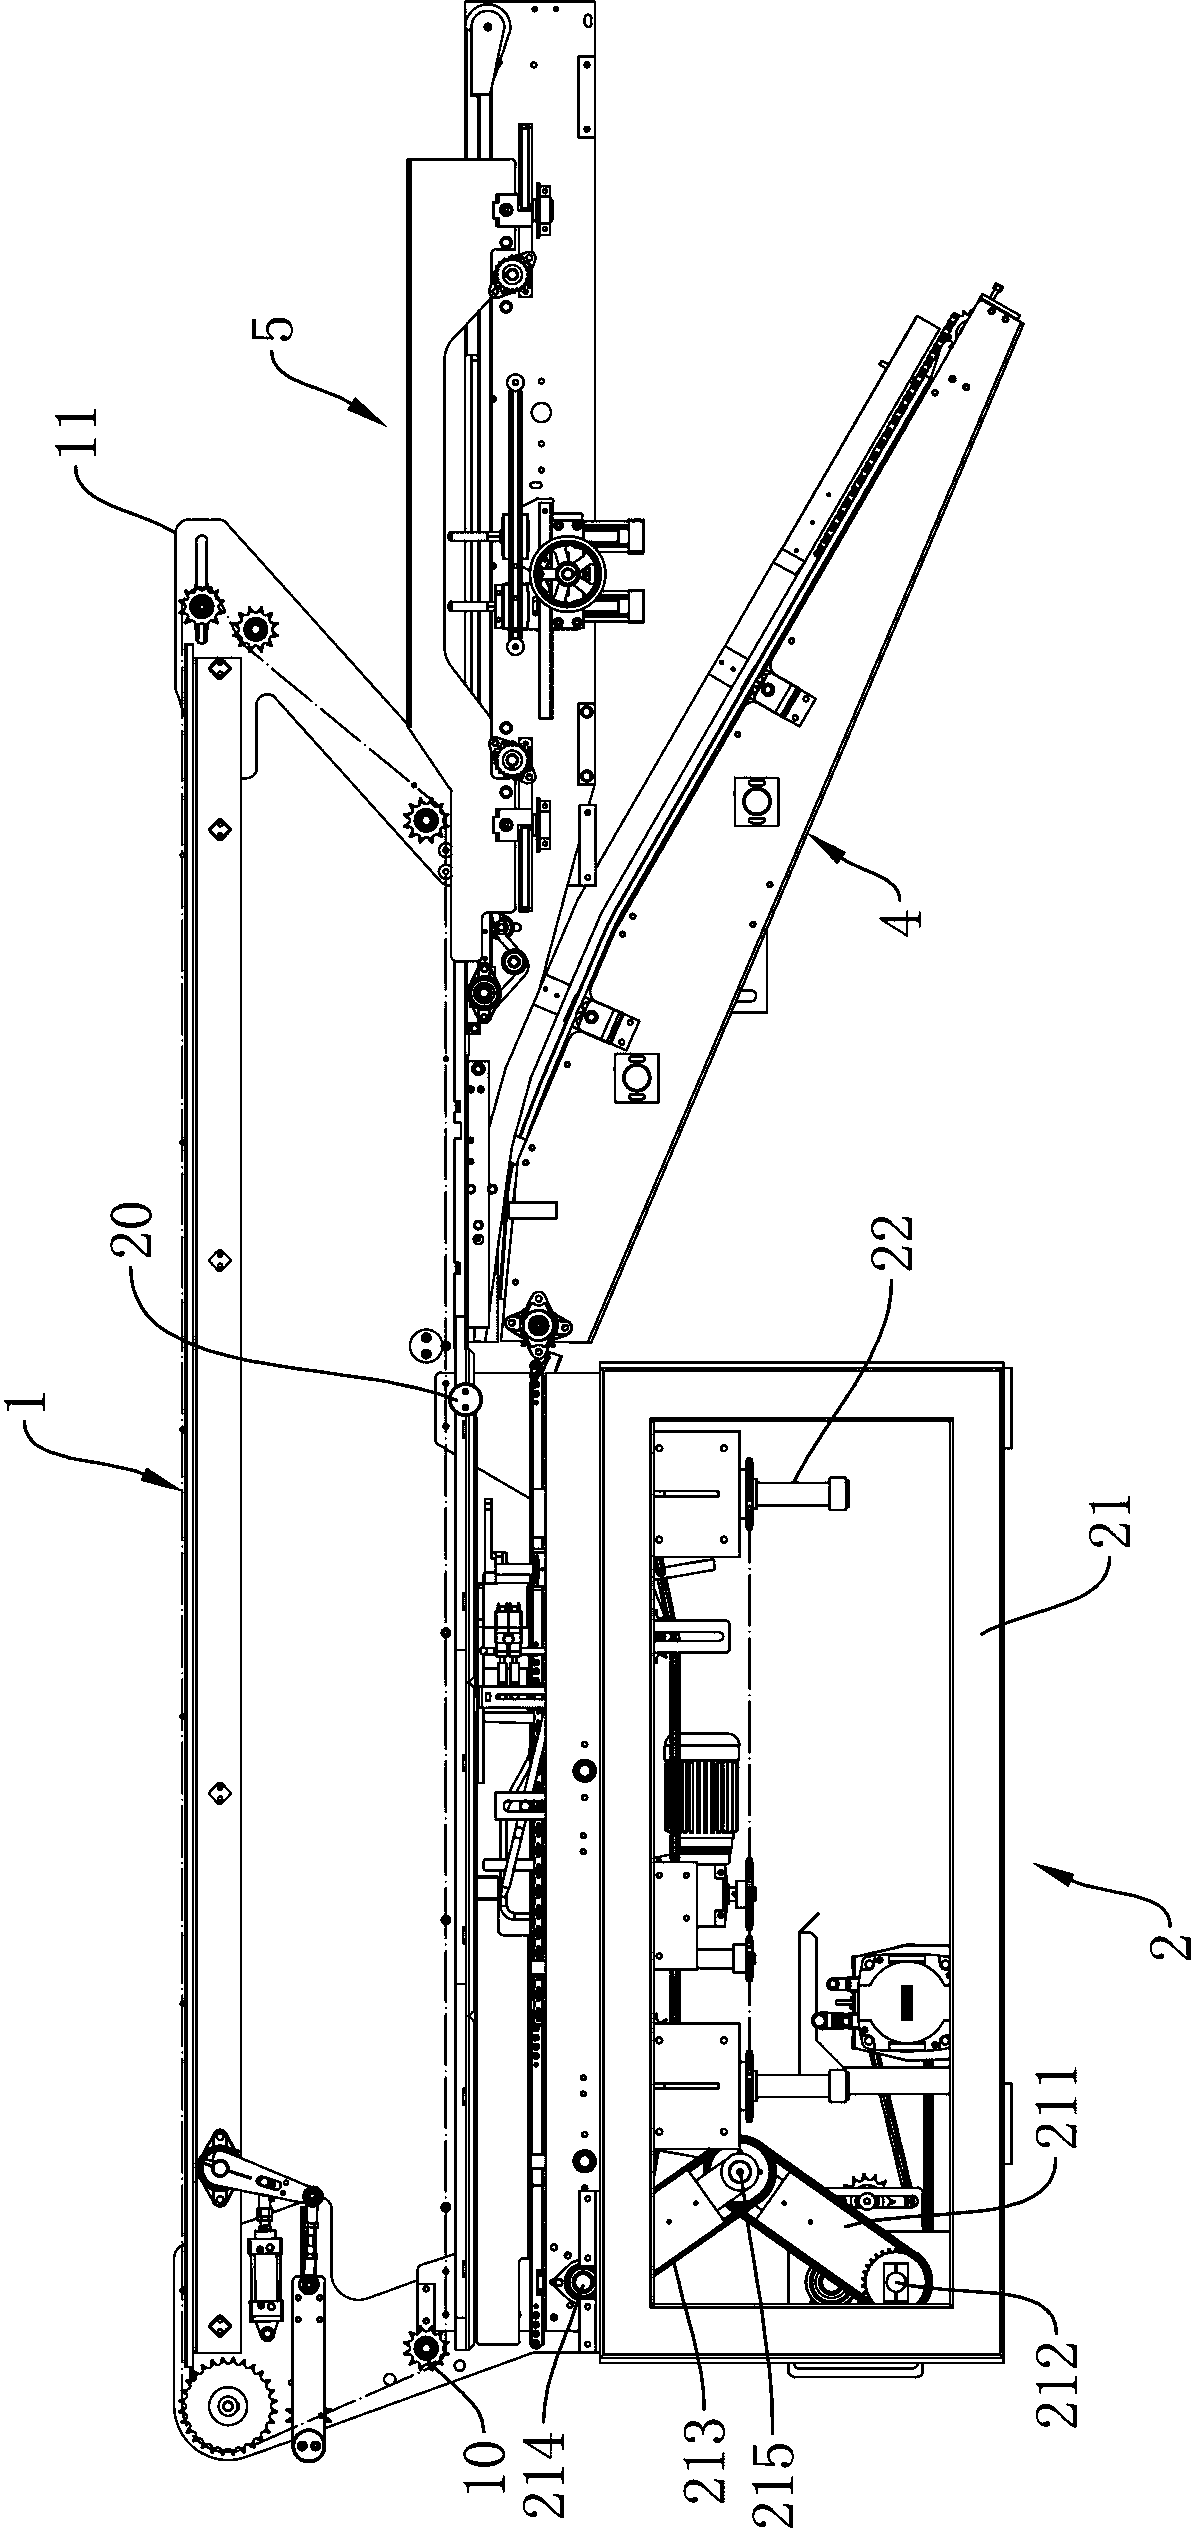 Half support, paperboard and bulk tank three-in-one envelop switching device